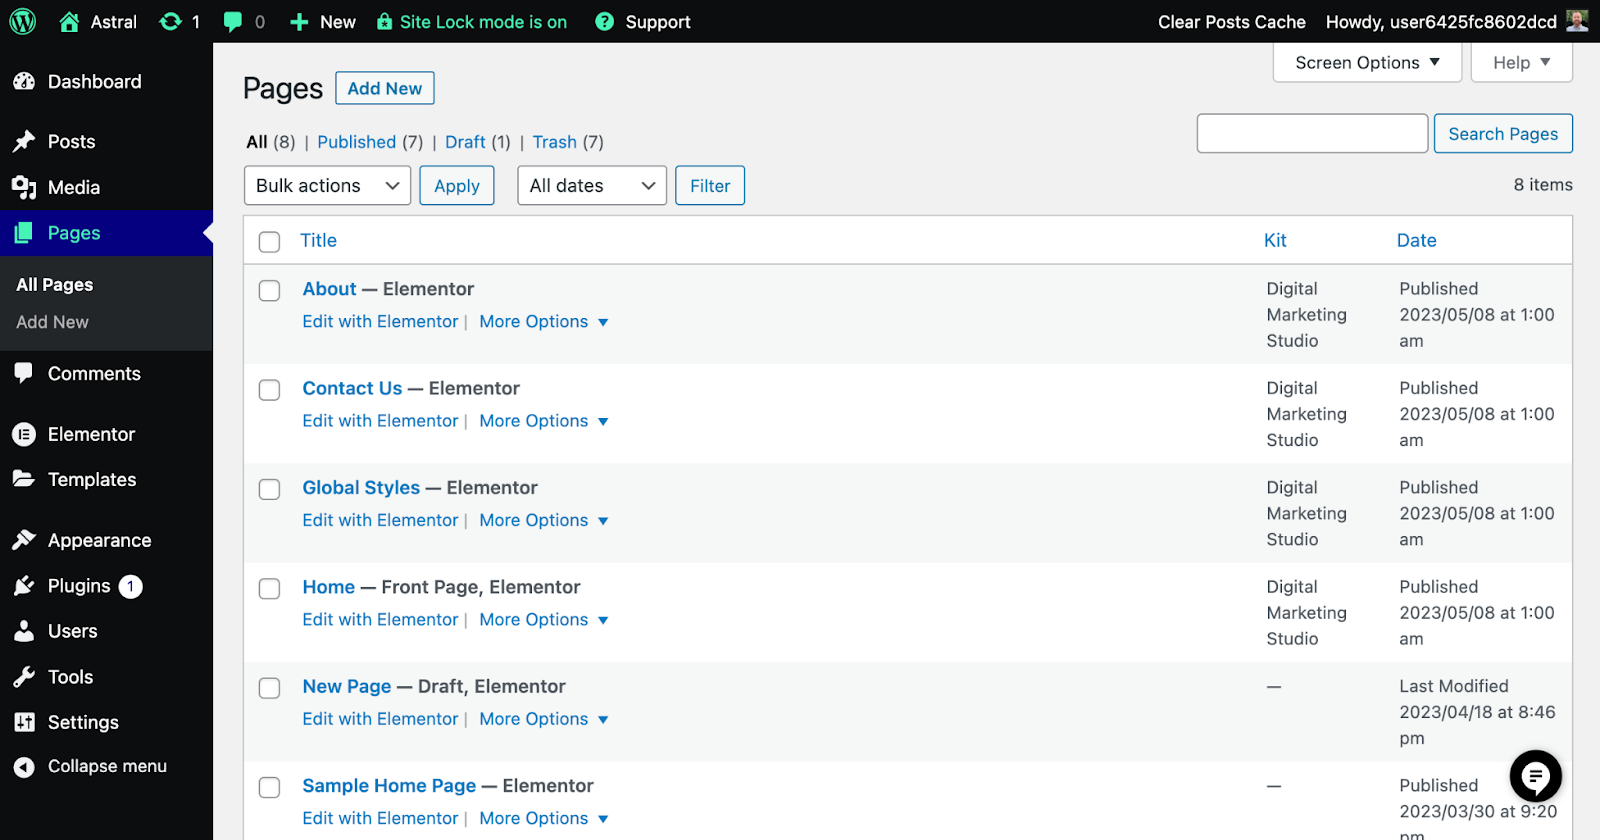 A list of pages in the WordPress dashboard